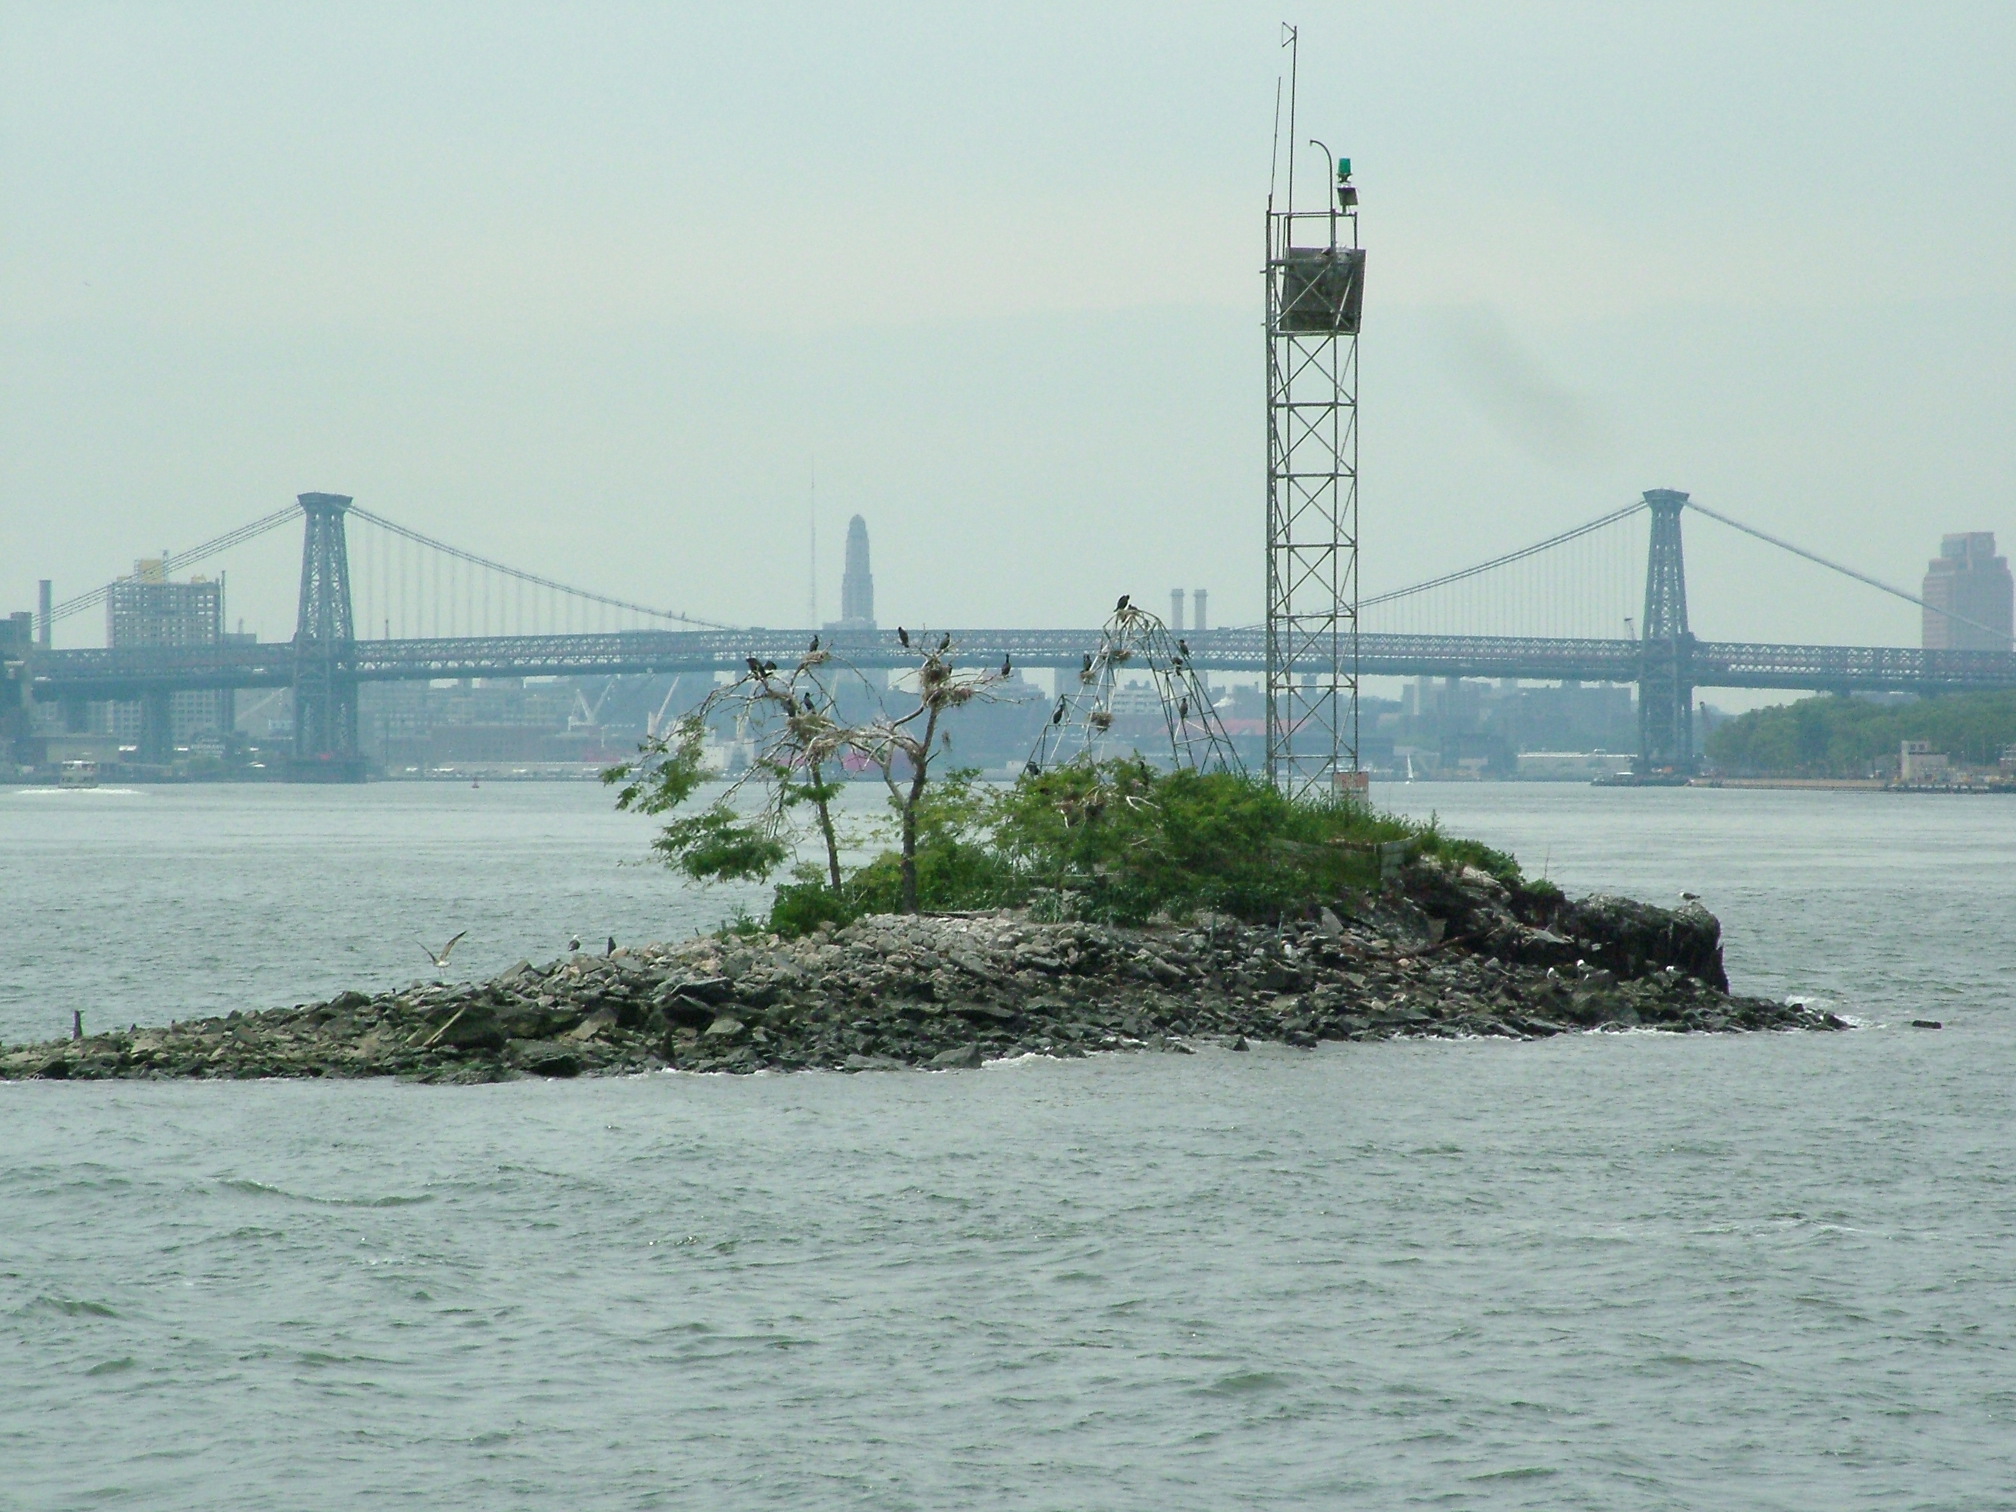 U Thant Island from the north, with the Williamsburg Bridge in the background. Photo: Wikimedia Commons / Pacific Coast Highway